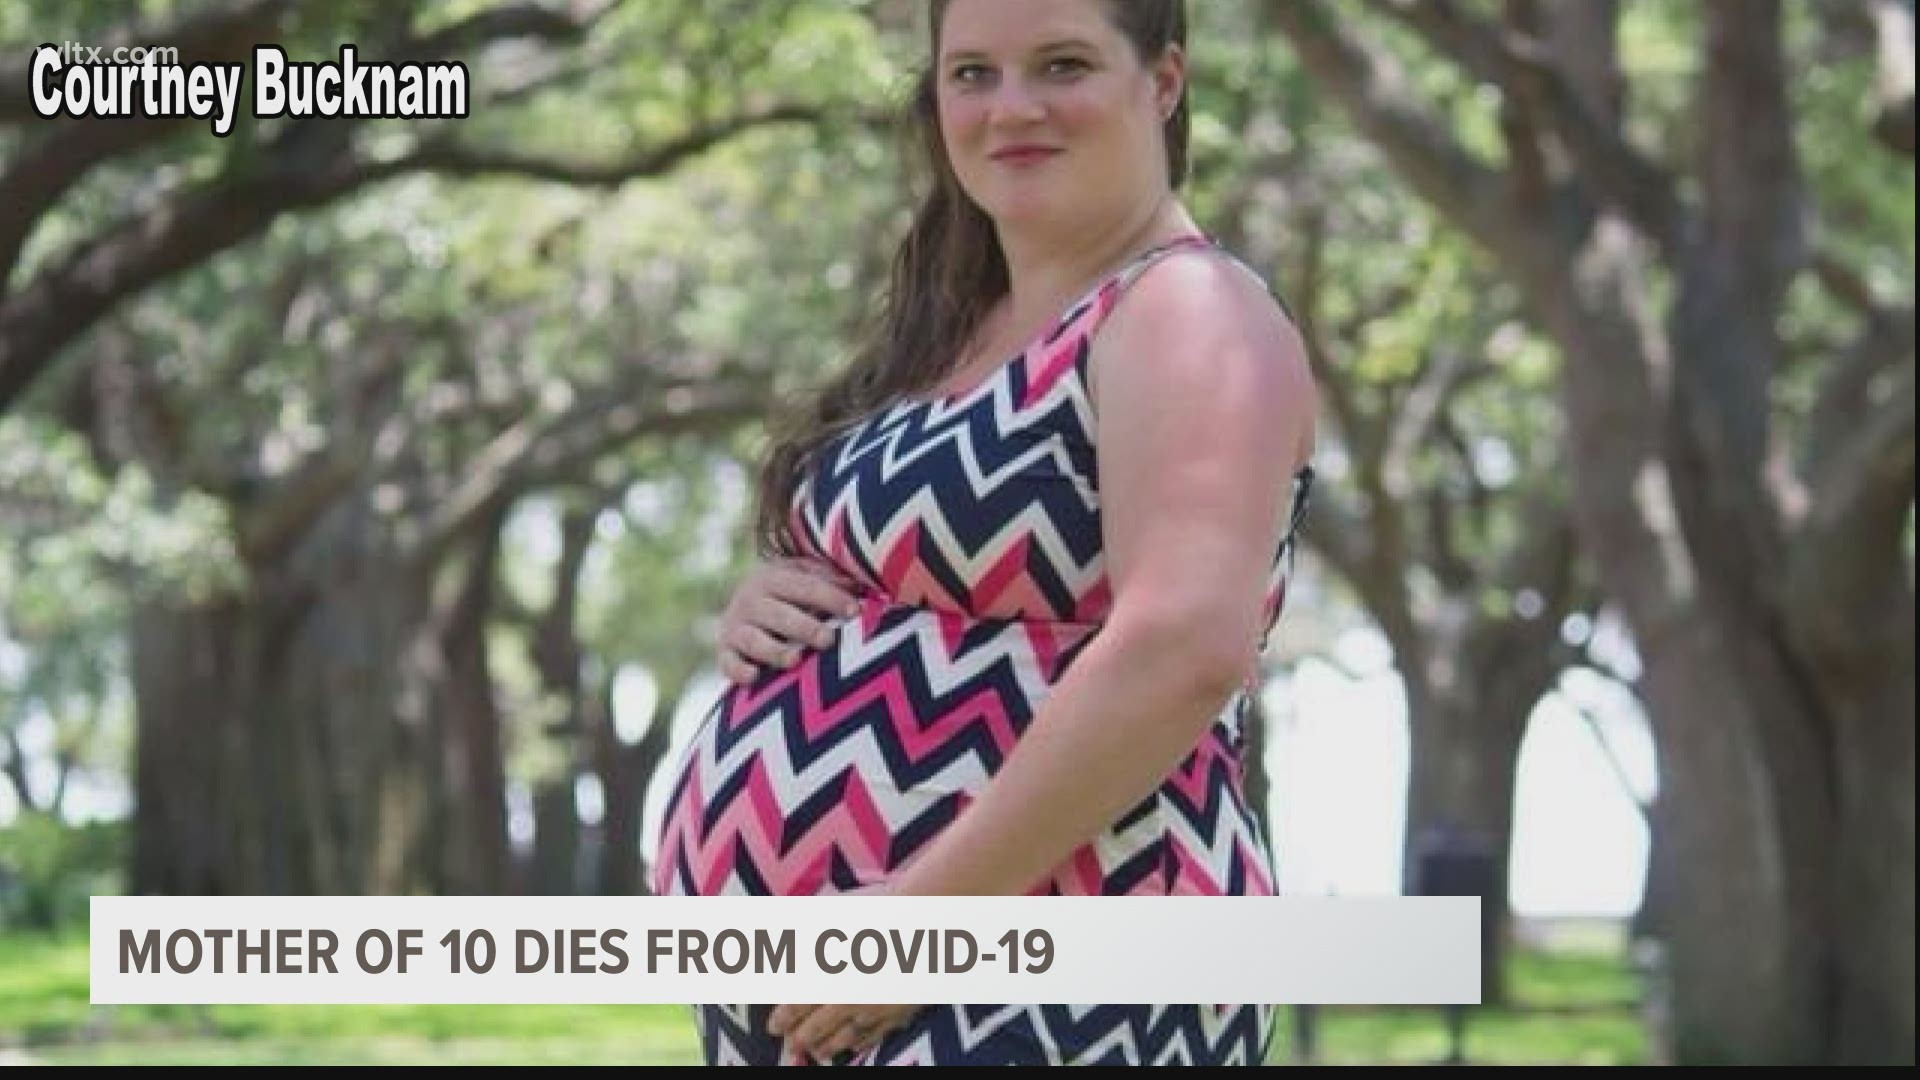 A Midlands family is grieving the loss of a beloved Midlands mother of ten who never even got to hold her newborn baby girl after COVID-19 stole her life from them.